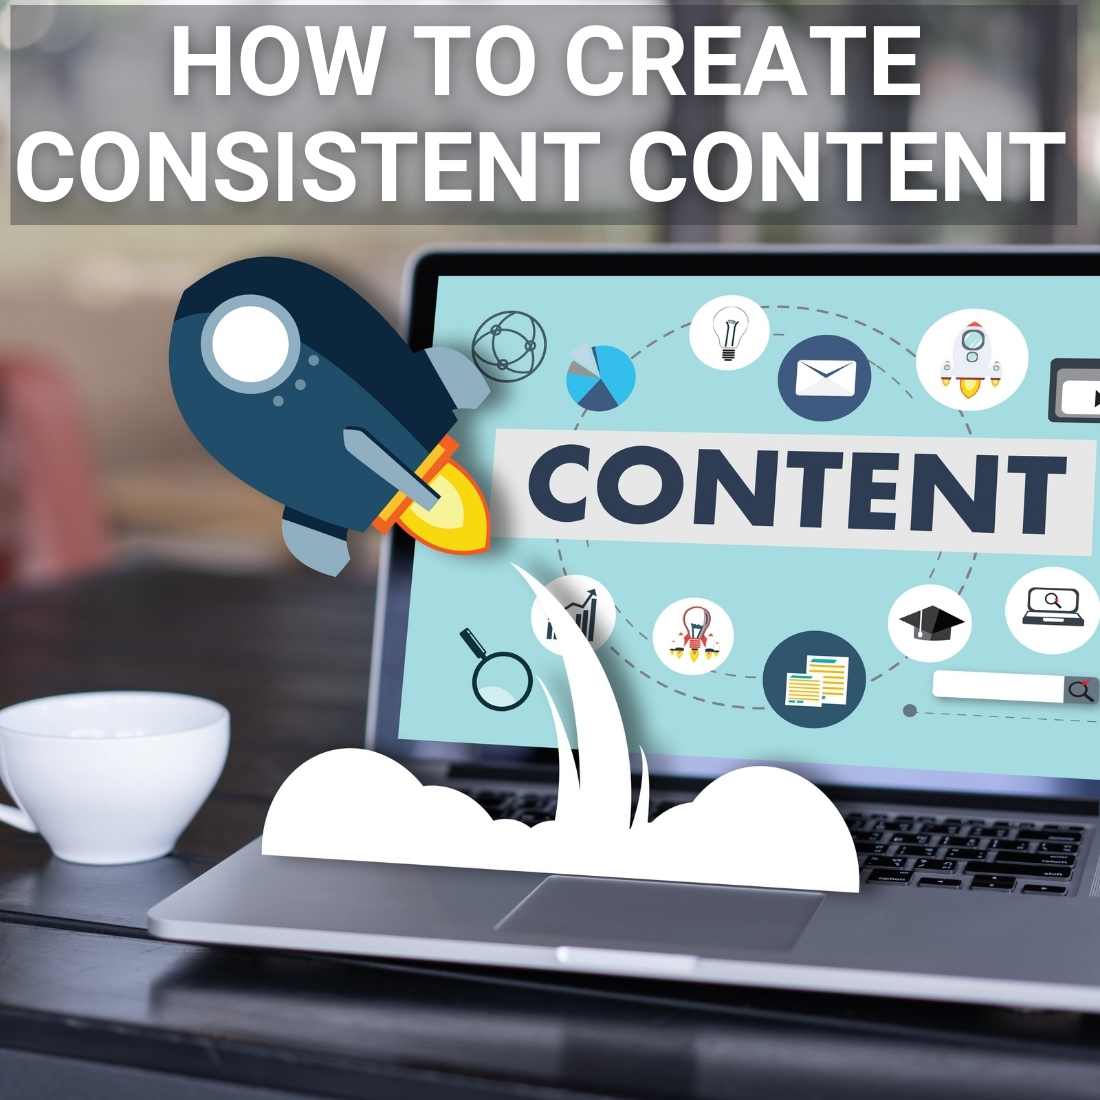 How To Create Consistent Content2 How To Create Consistent Content (✓...sorted)